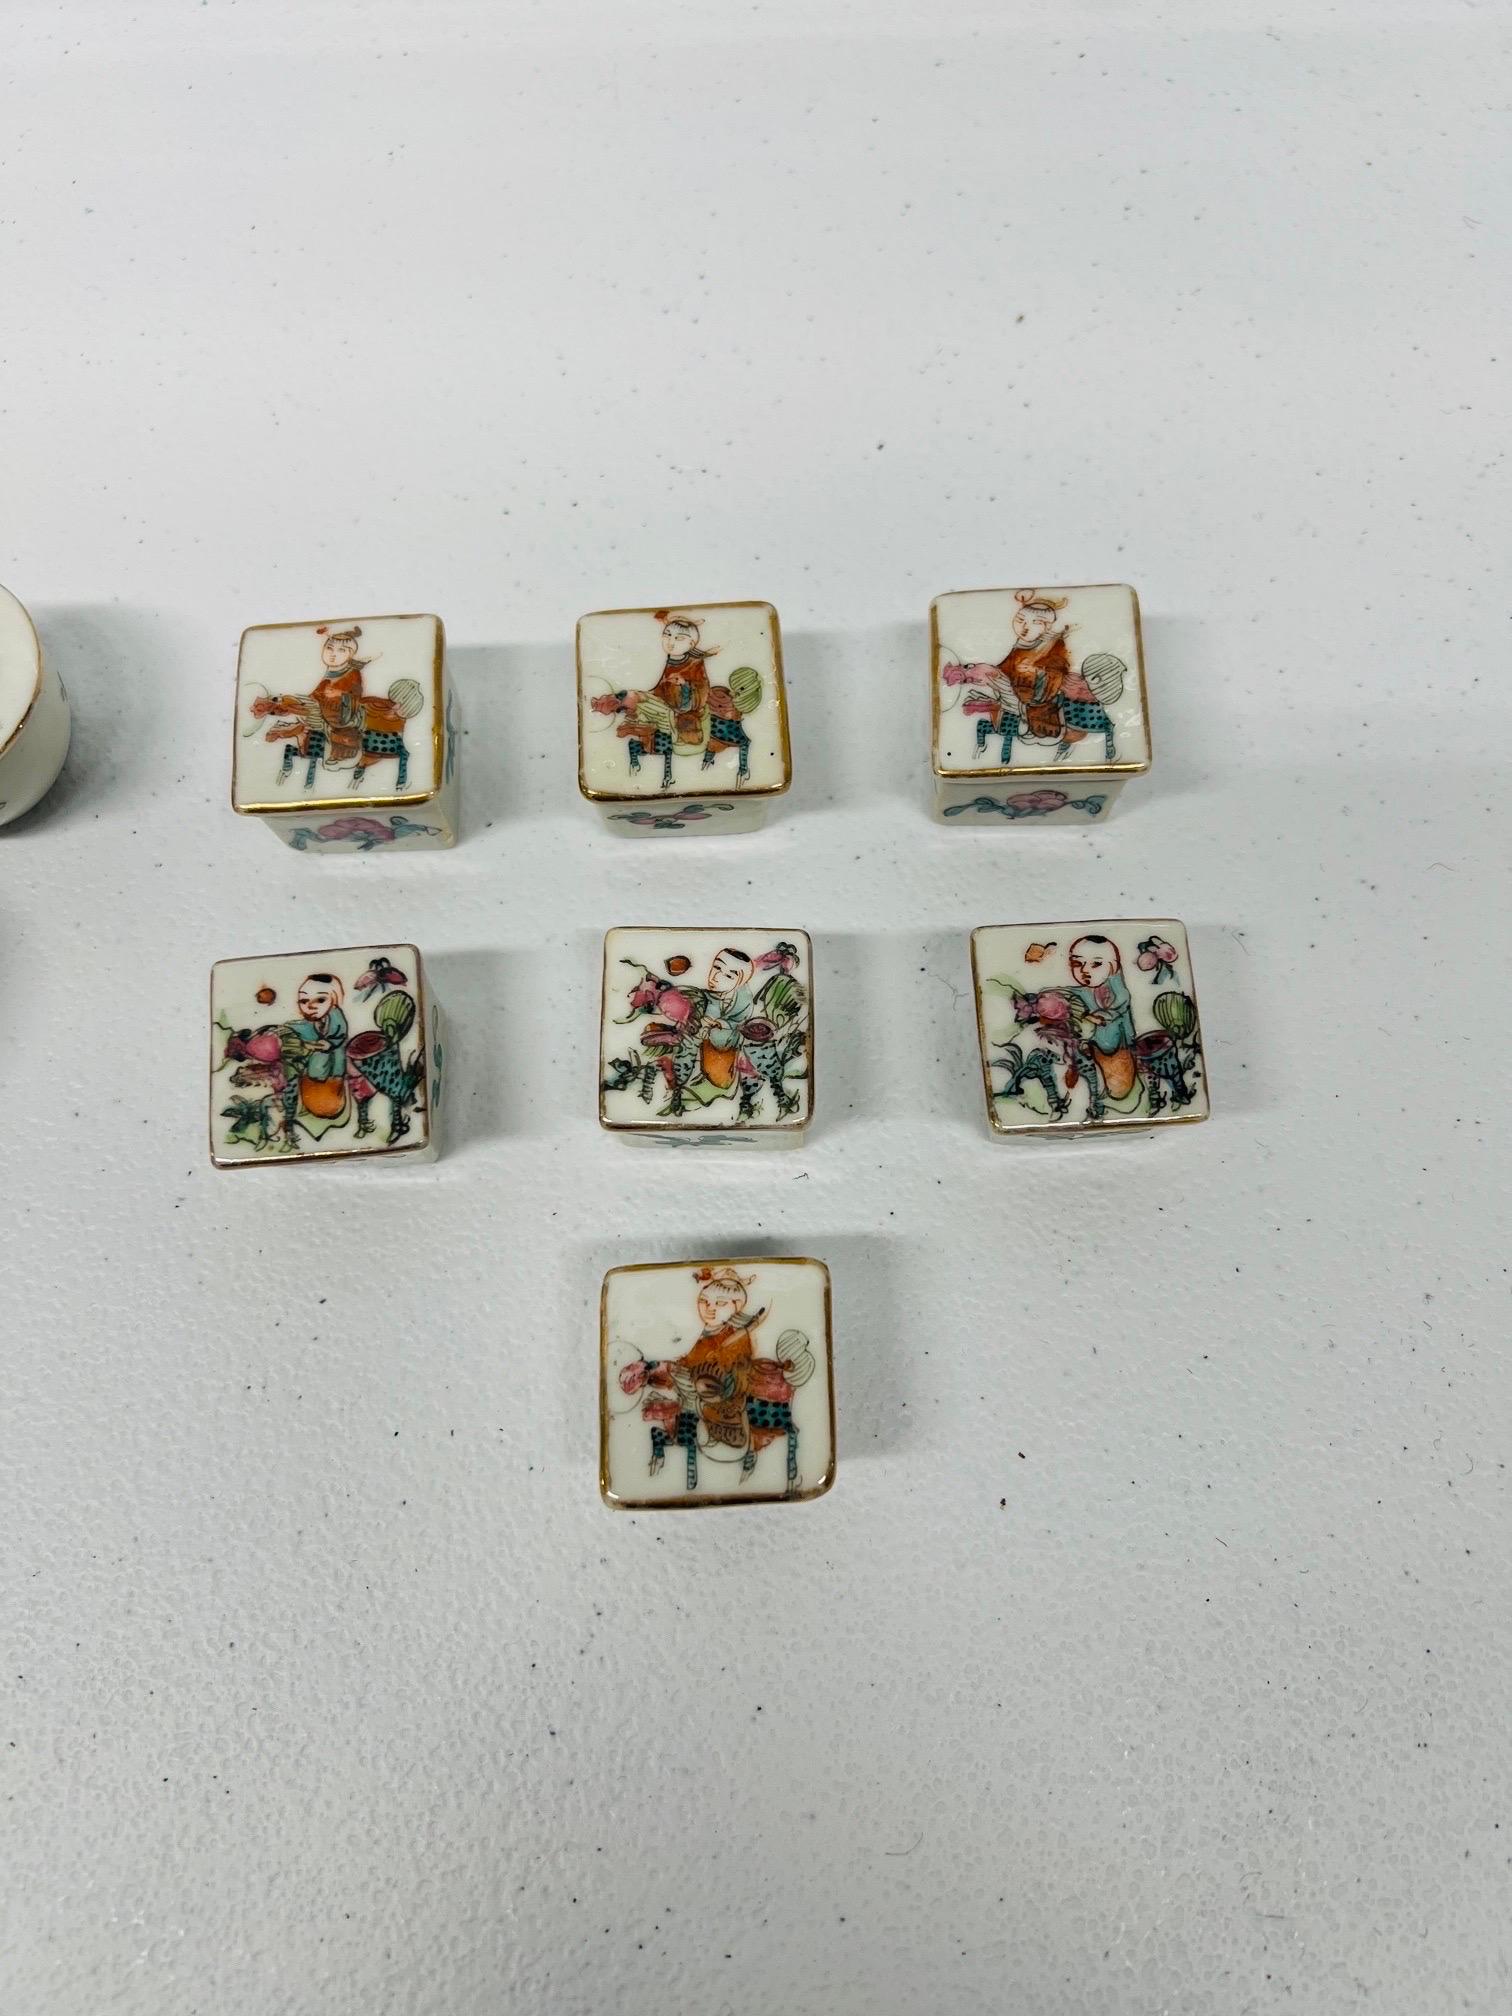 Chinese Export Qing Dynasty - 13 Antique Chinese Porcelain Enameled Salt Boxes For Sale